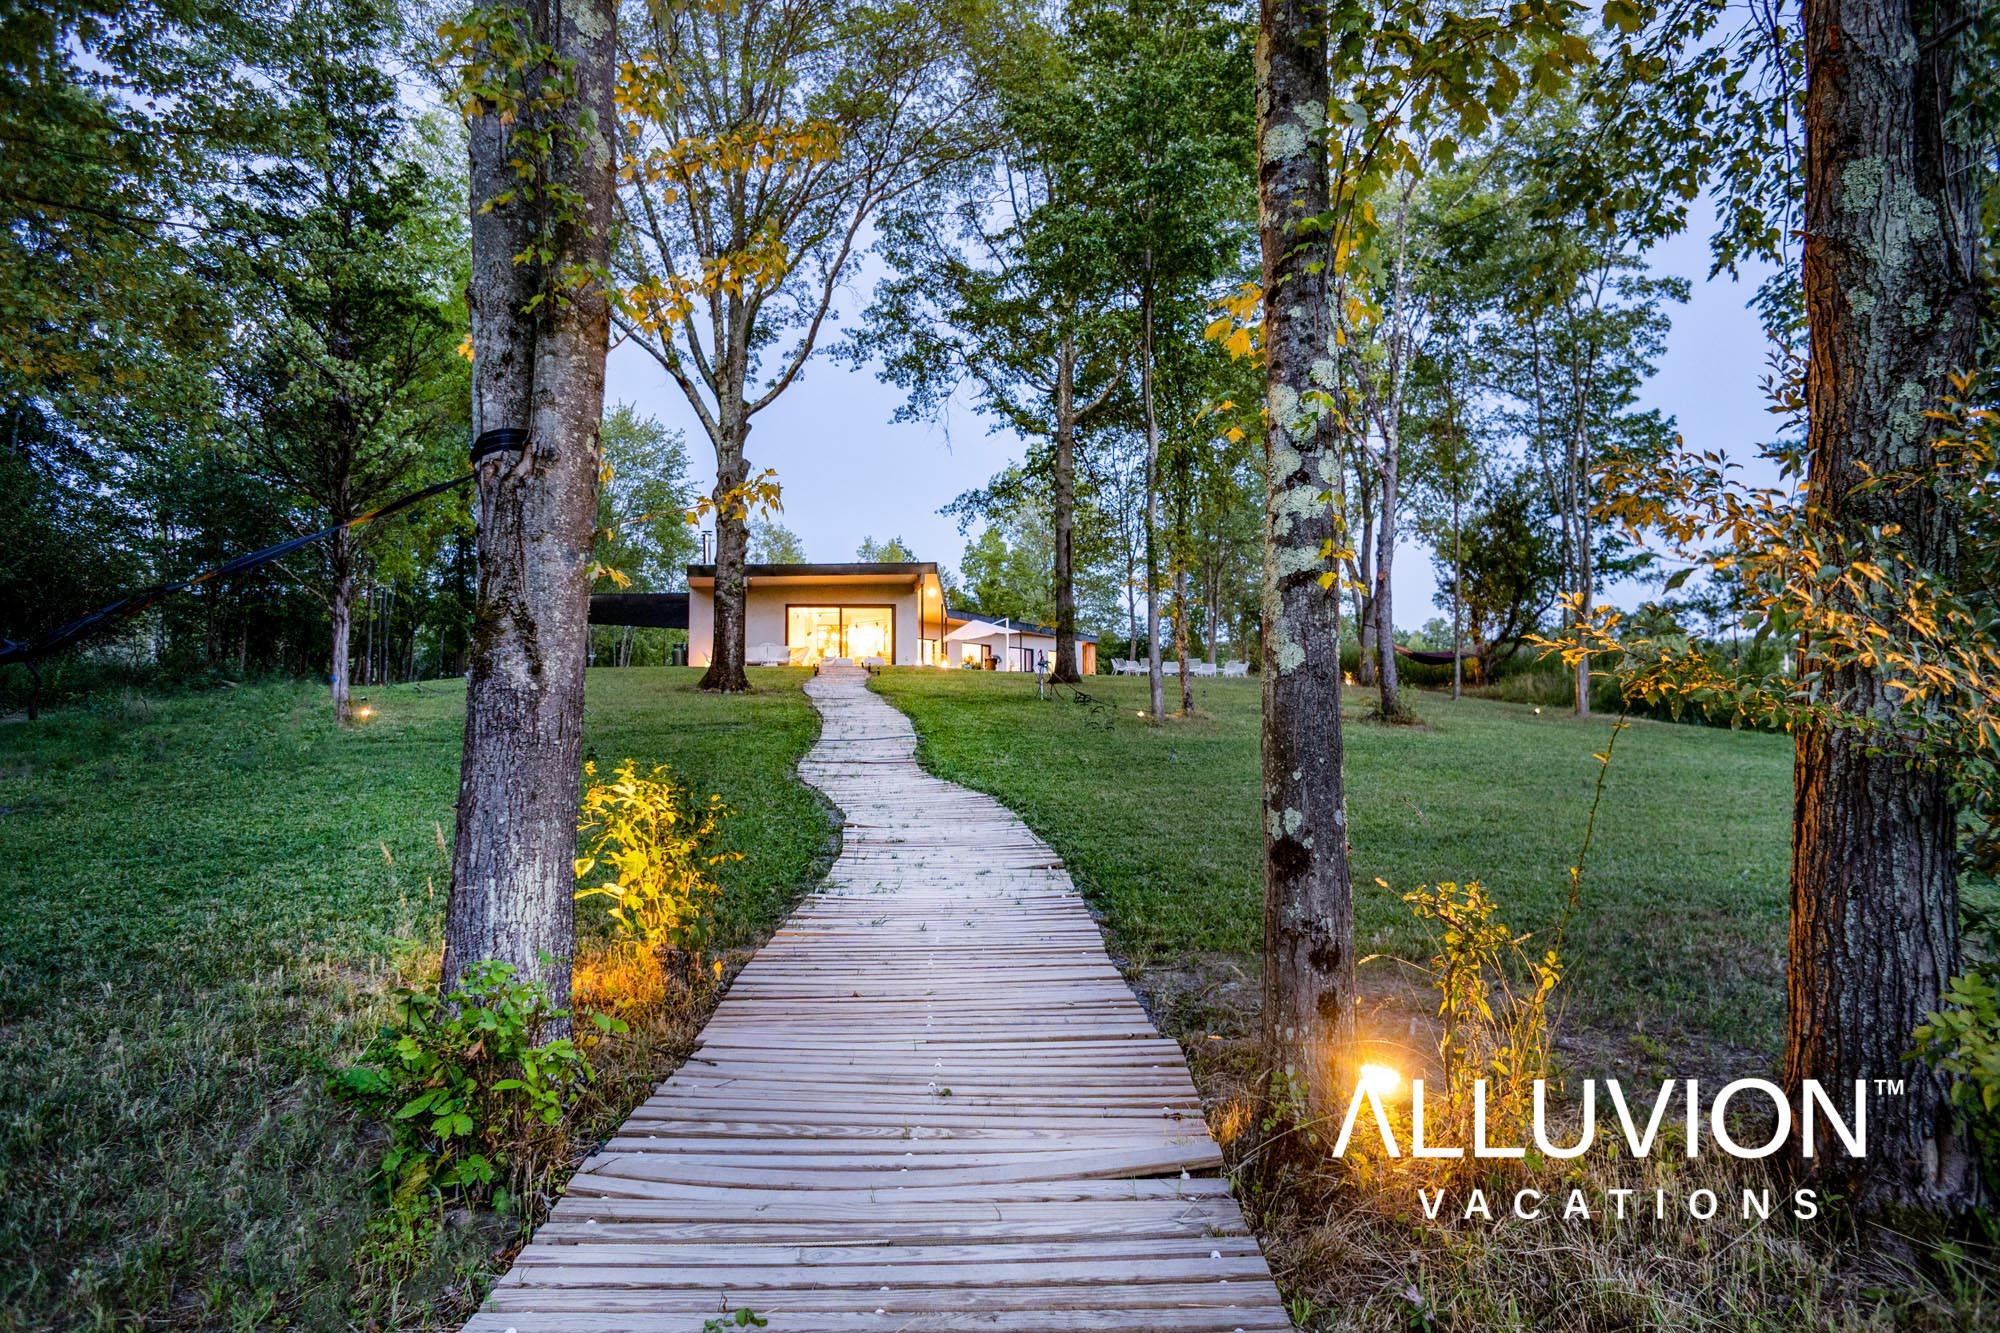 Experience the Magic of Hudson Valley with Alluvion Vacations – Luxury Airbnb Villa in the heart of Hudson Valley Farmland – Airbnb Photography by Alluvion Media / Maxwell Alexander – Vacation Rental Management by Alluvion Vacations